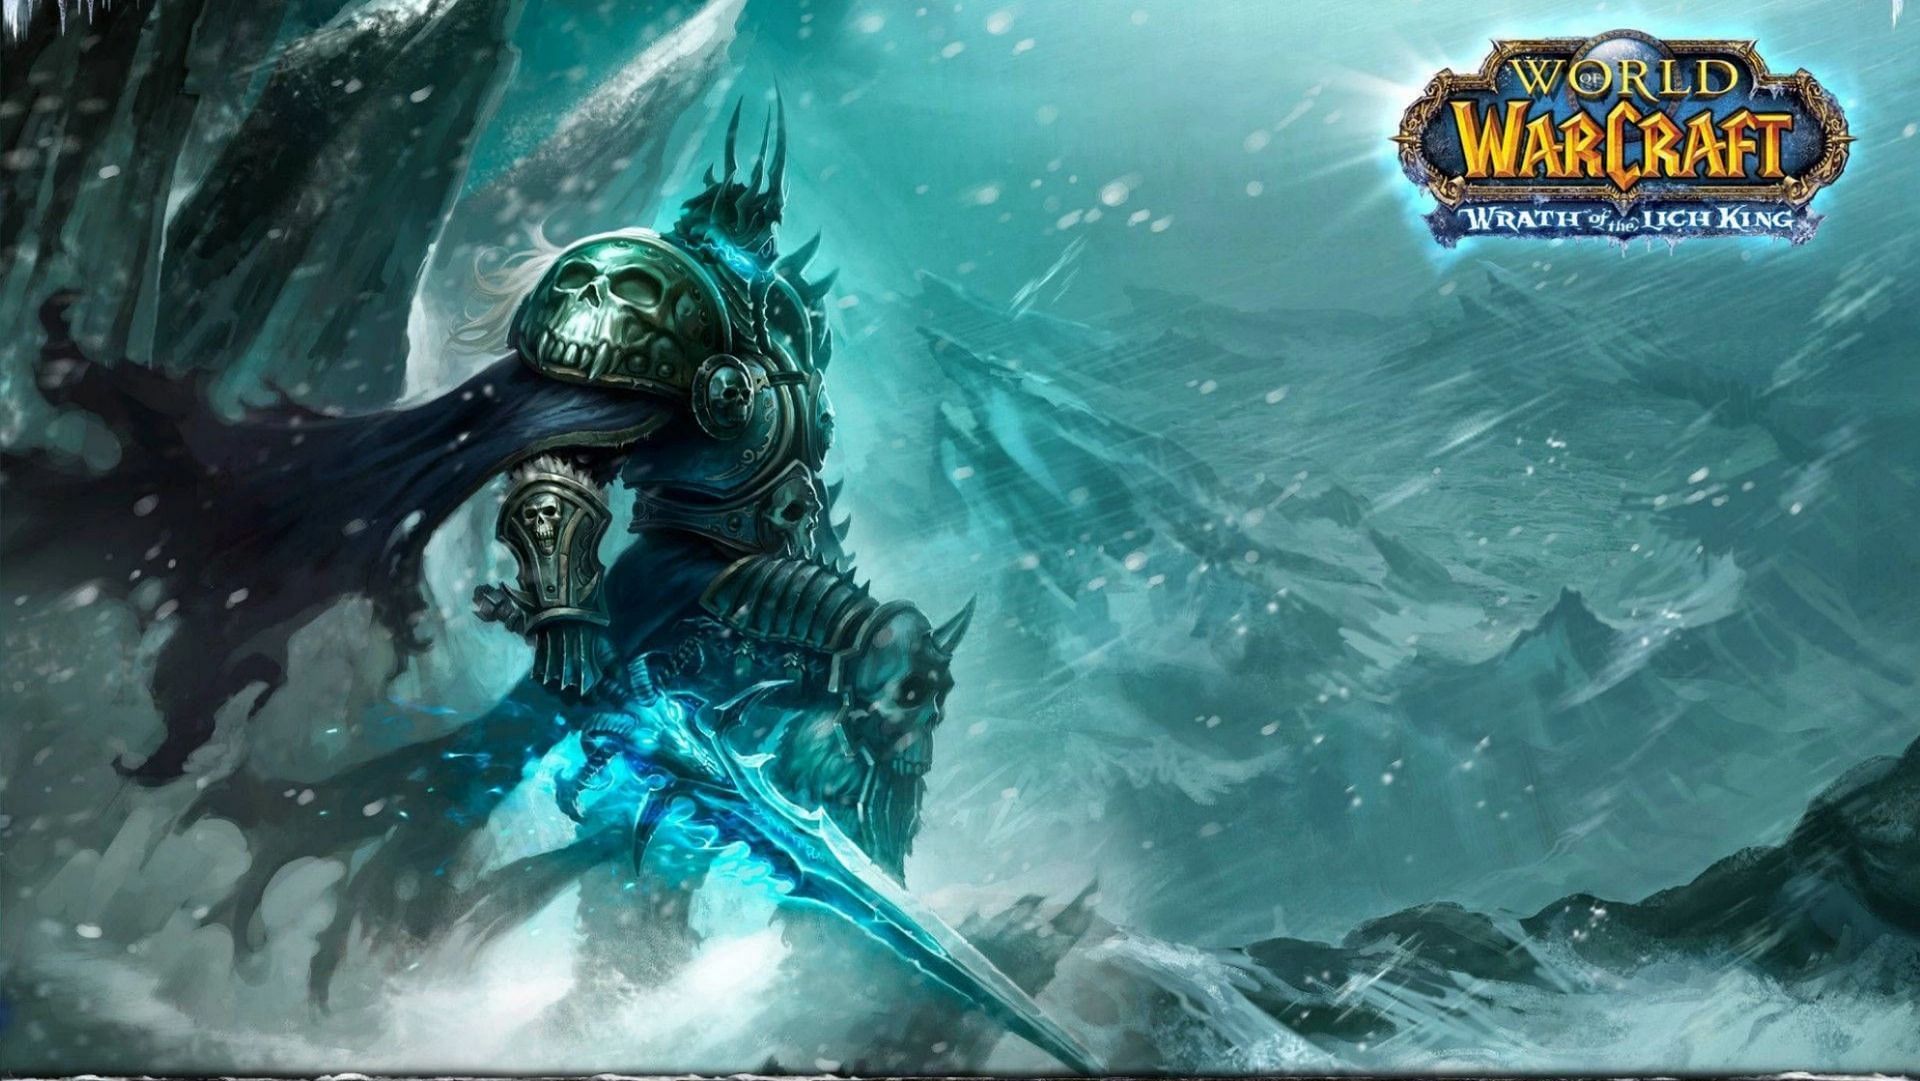 WoW Classic: Wrath of the Lich King guide - What is each race's best class?